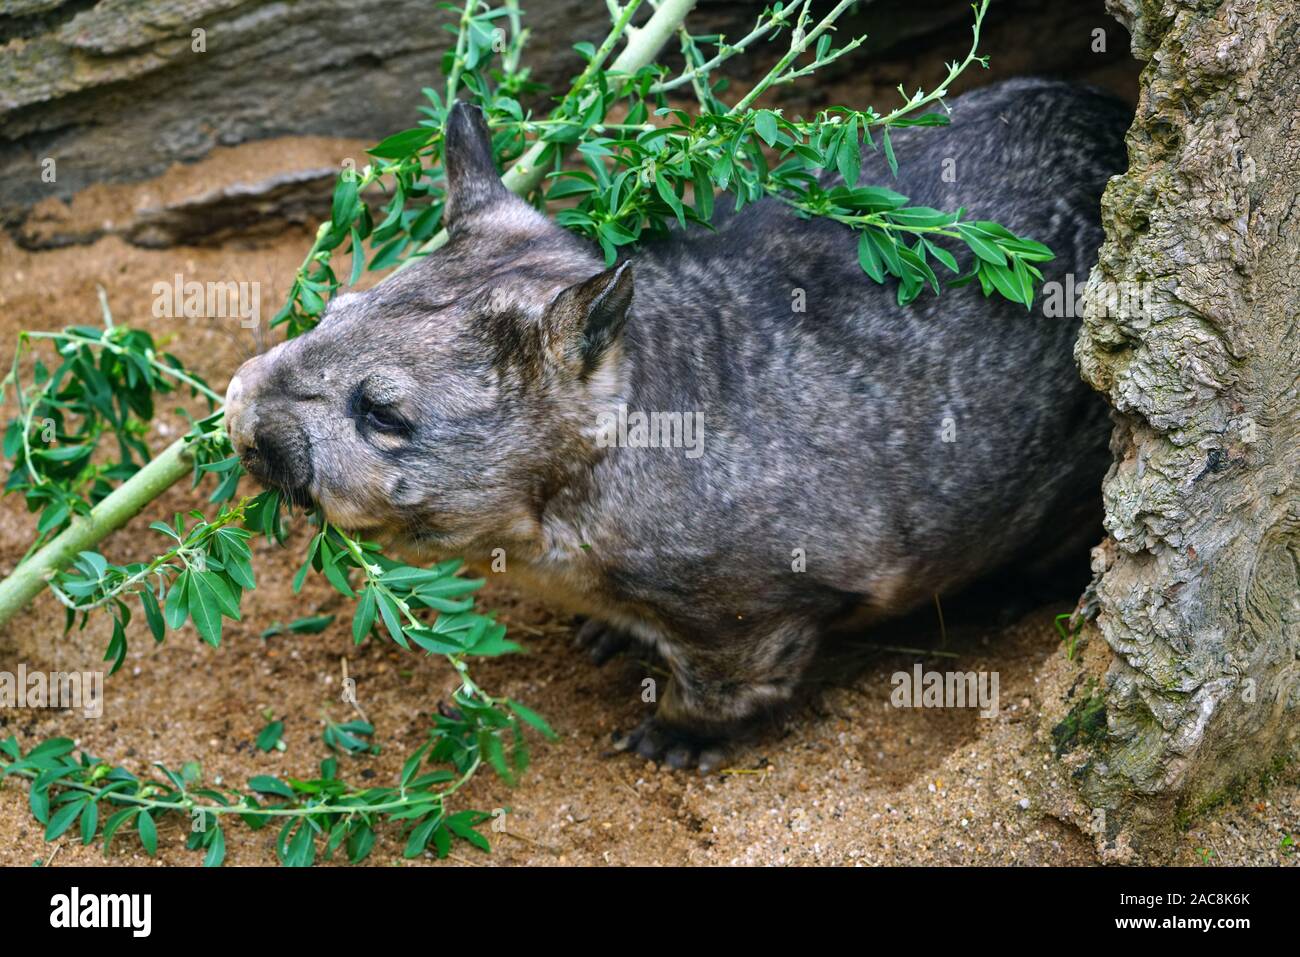 View of a Southern hairy-nosed wombat (Lasiorhinus latifrons) at the Melbourne Zoo Stock Photo